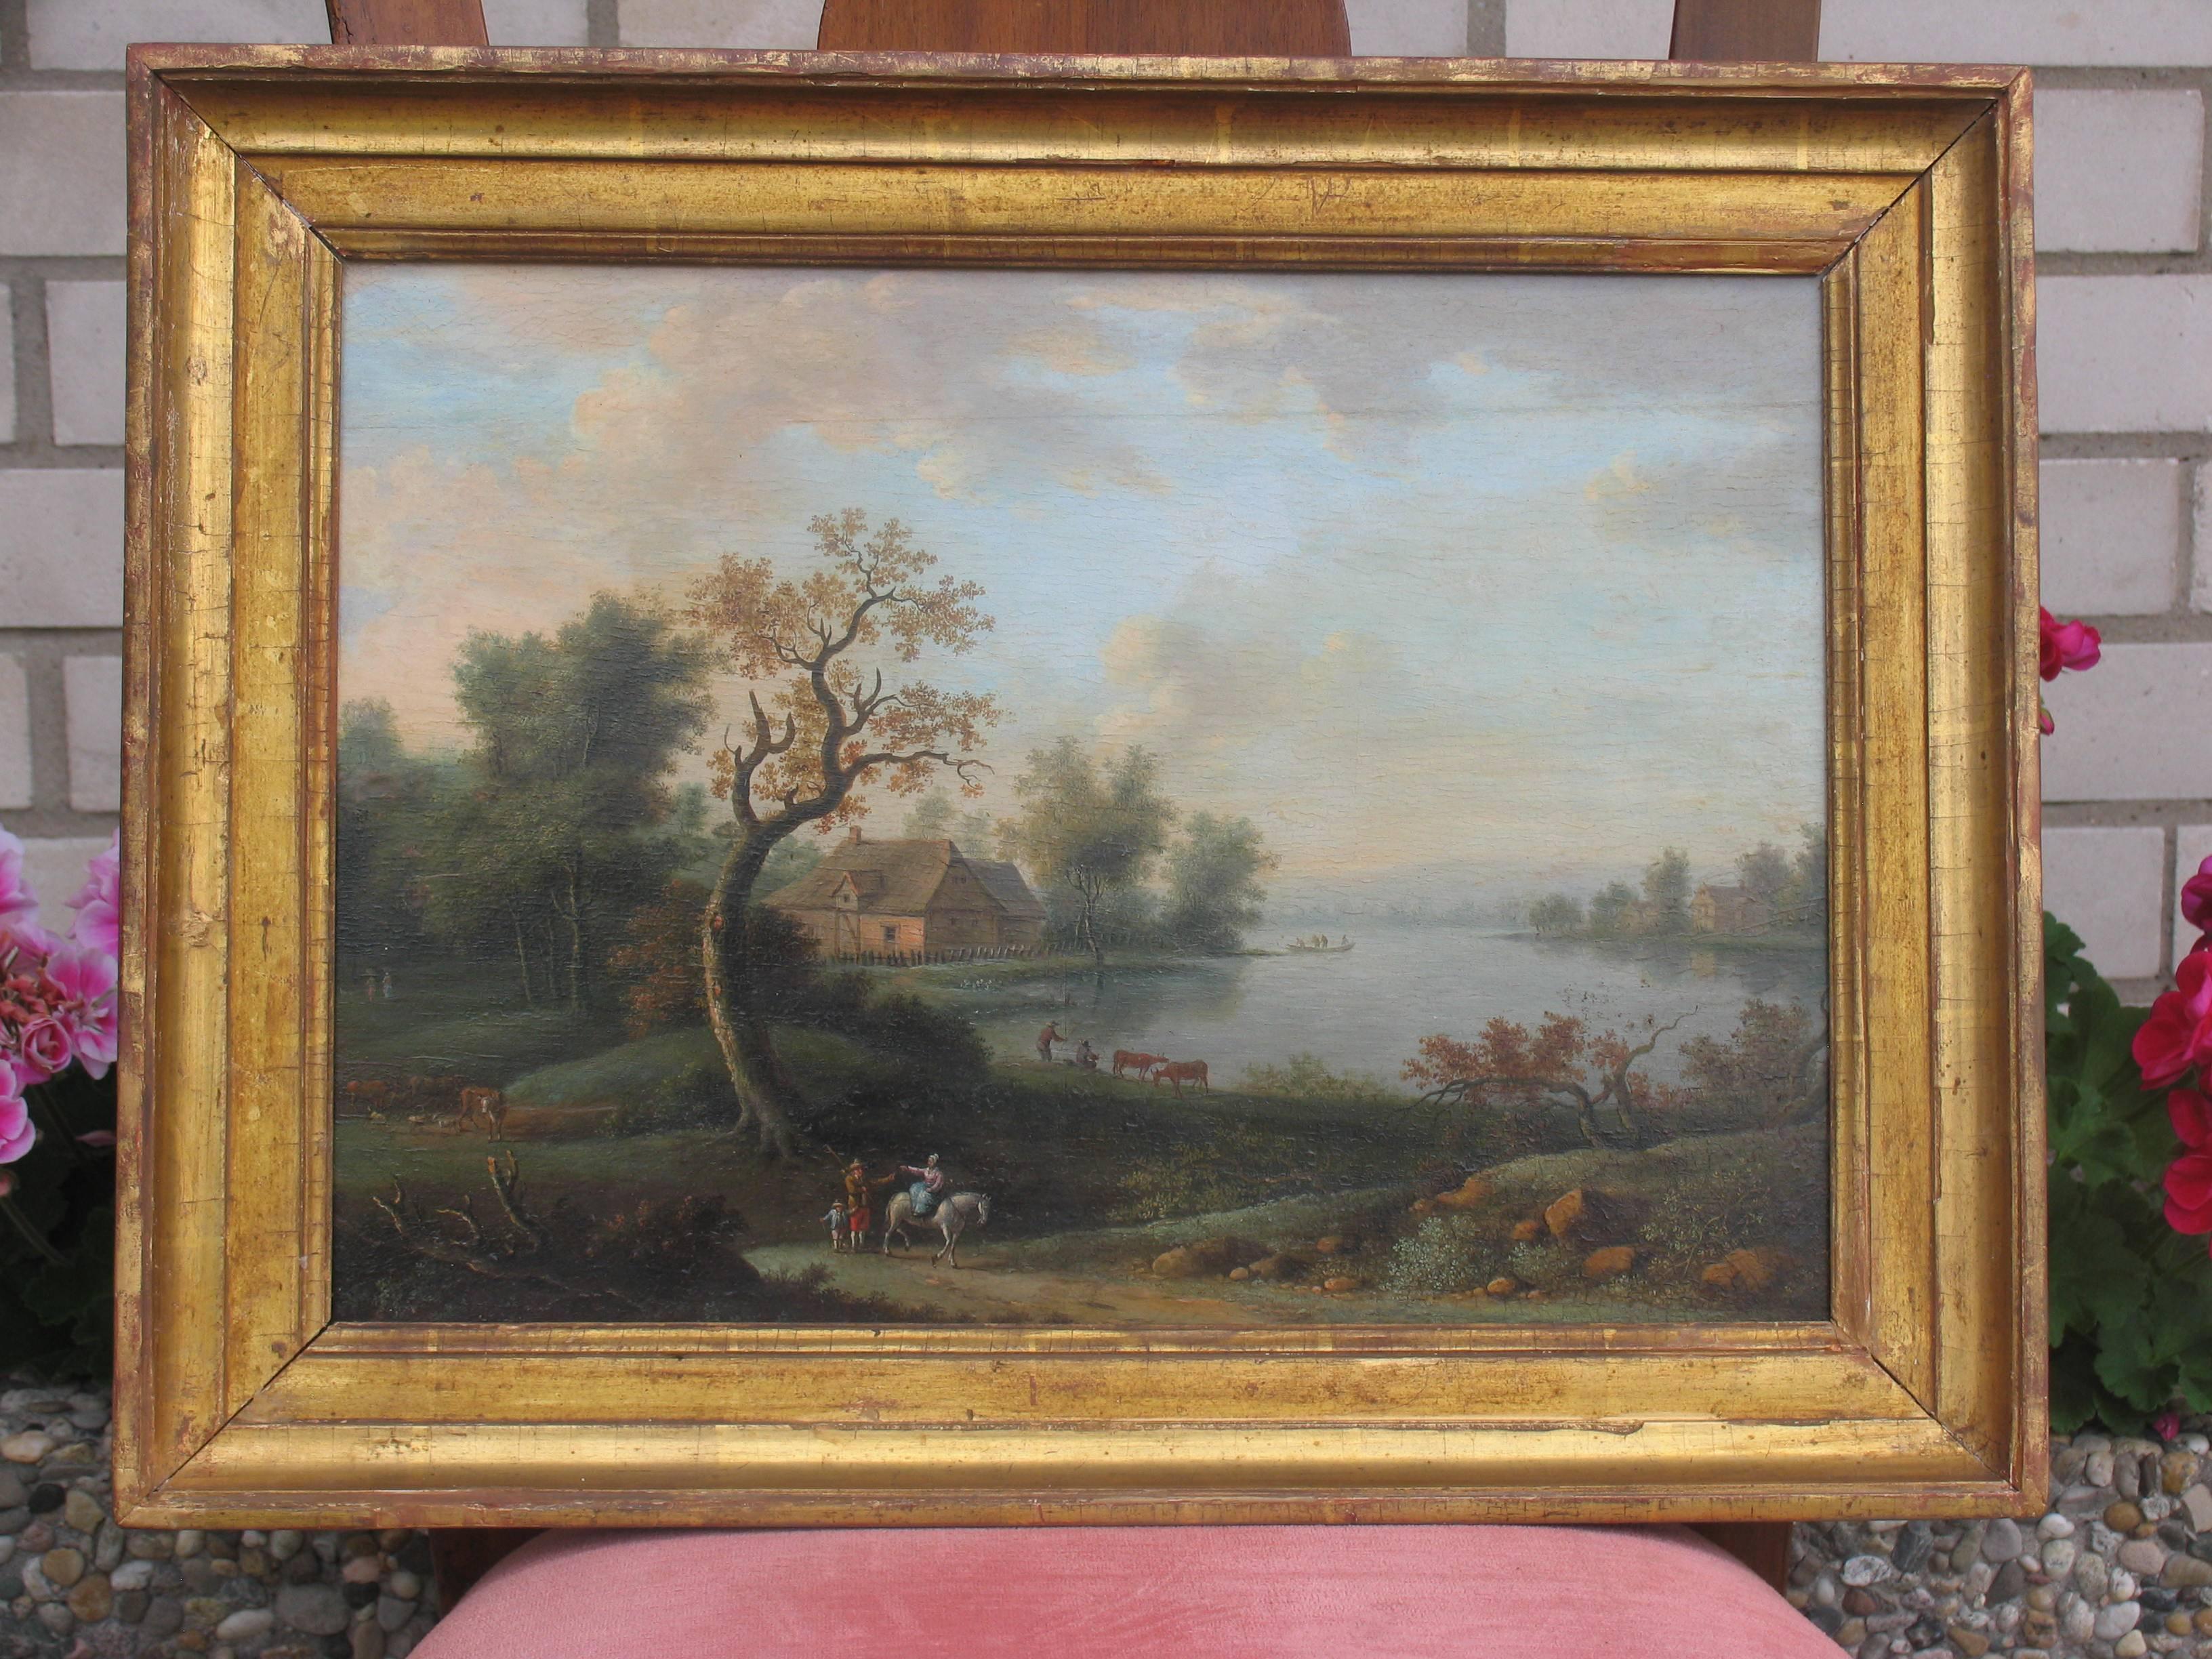 Pair of end of 18th century/early 19th century landscape paintings with pastoral scenes. Oil on wood. The paintings will be shipped from Germany. Please ask for a shipping quote for the shipping from Germany to Boston. The shipping from Boston to